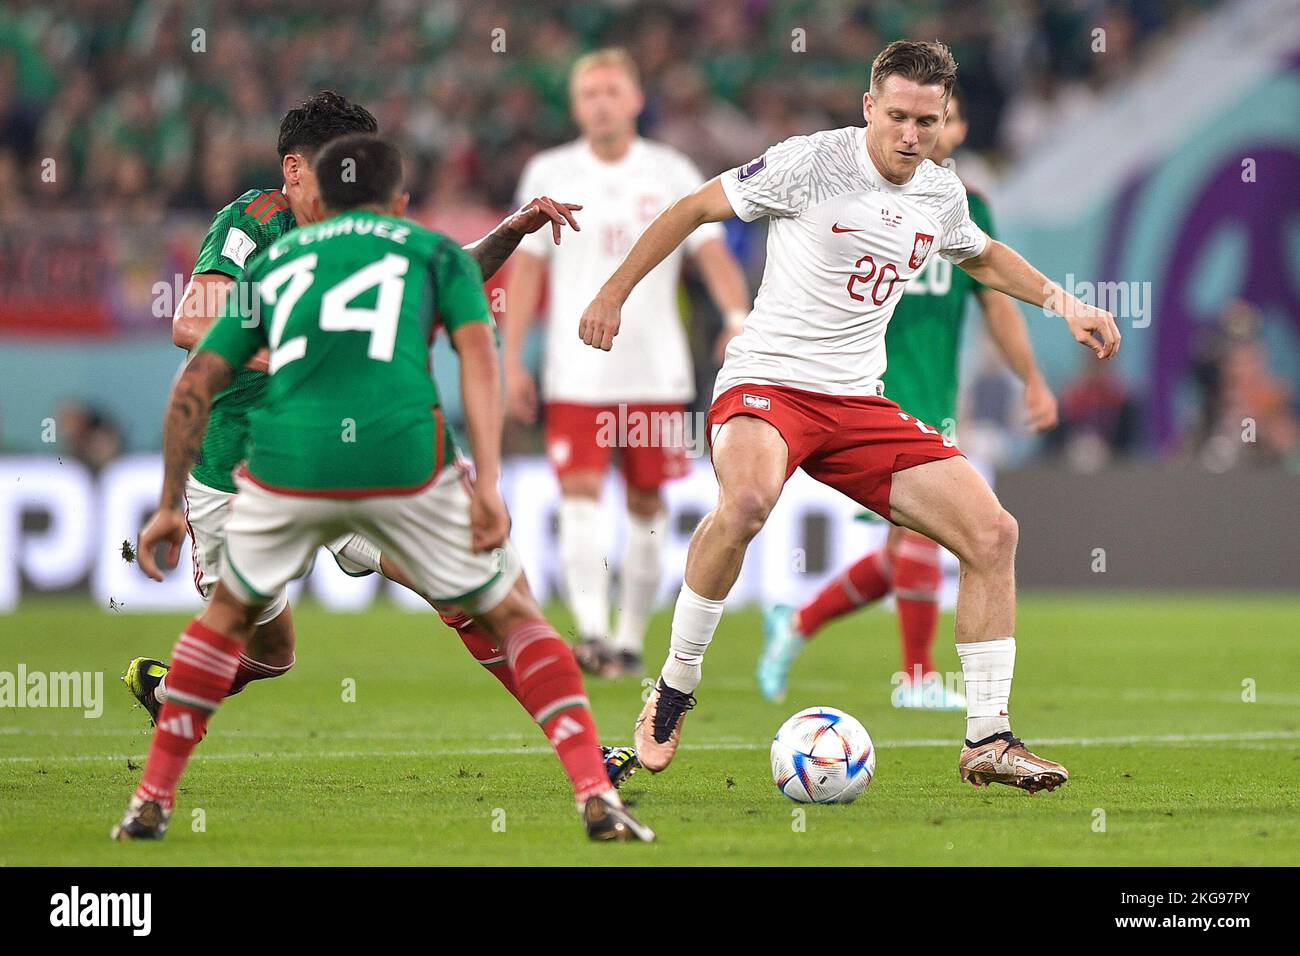 DOHA, QATAR - NOVEMBER 22: Hector Moreno of Mexico battles for the ball with Piotr Zielinski of Poland during the Group C - FIFA World Cup Qatar 2022 match between Mexico and Poland at Stadium 974 on November 22, 2022 in Doha, Qatar (Photo by Pablo Morano/BSR Agency) Stock Photo